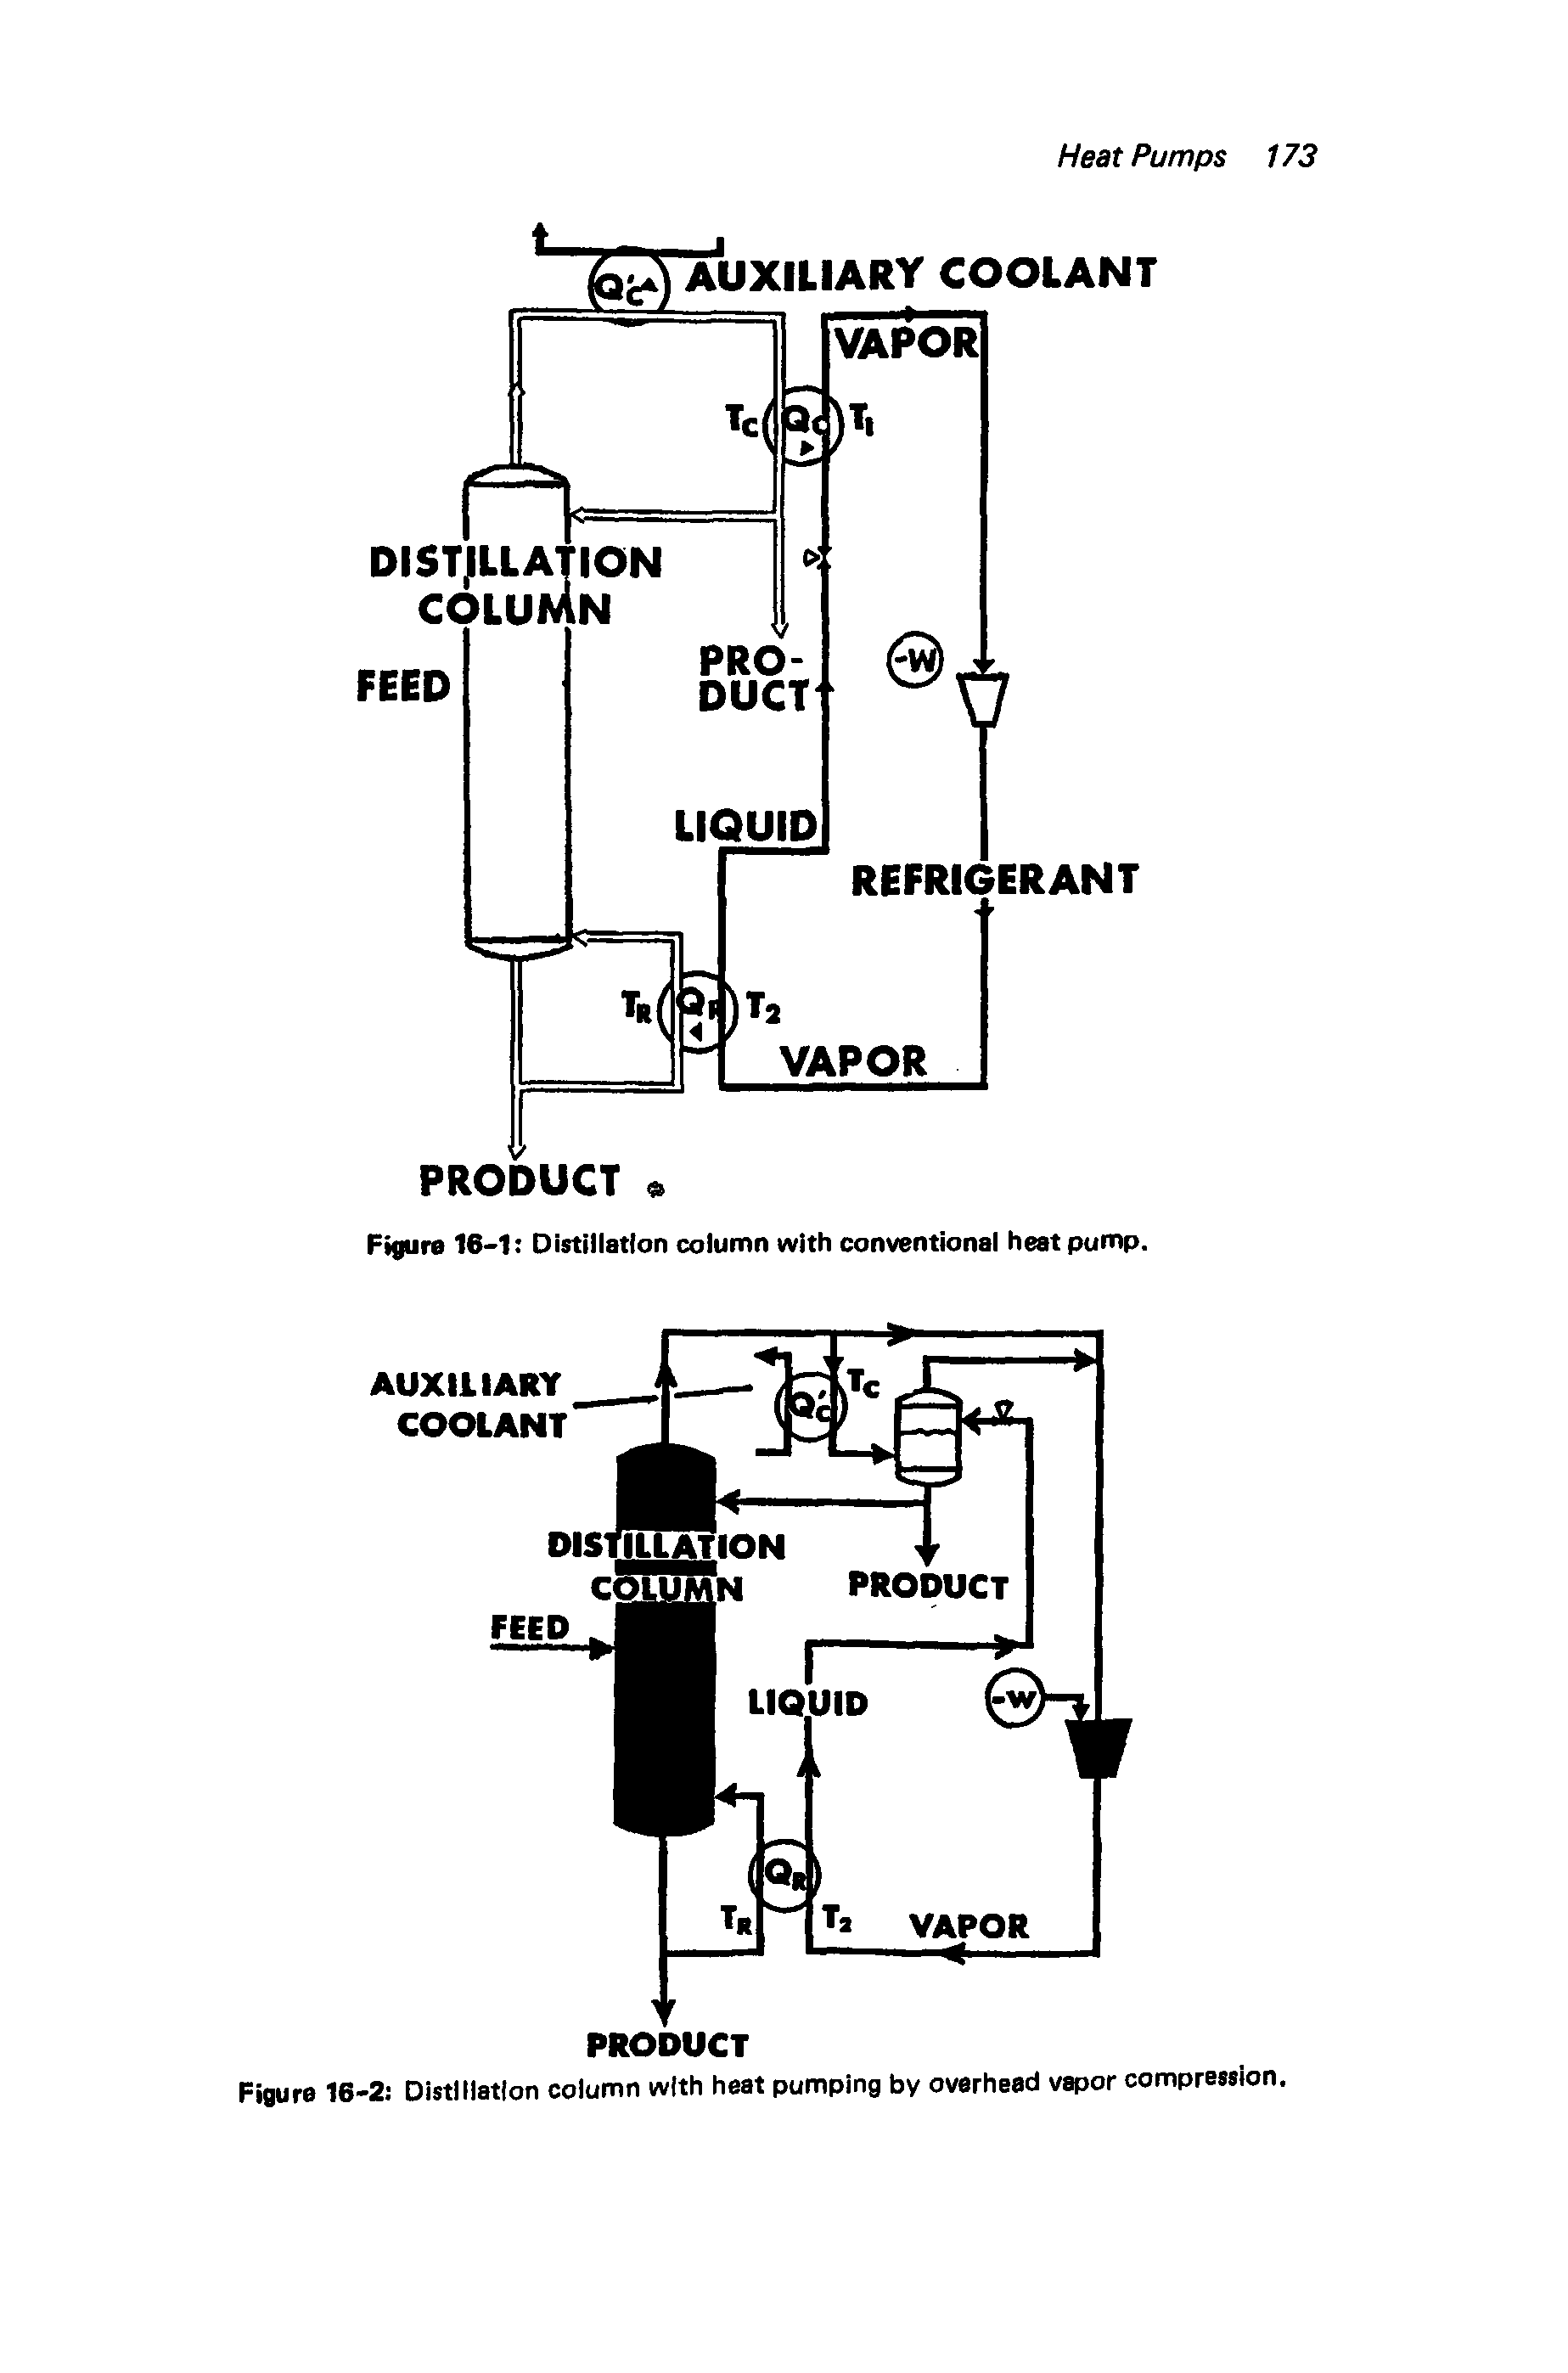 Figure 16-2 Distillation column with heat pumping by overhead vapor compression.